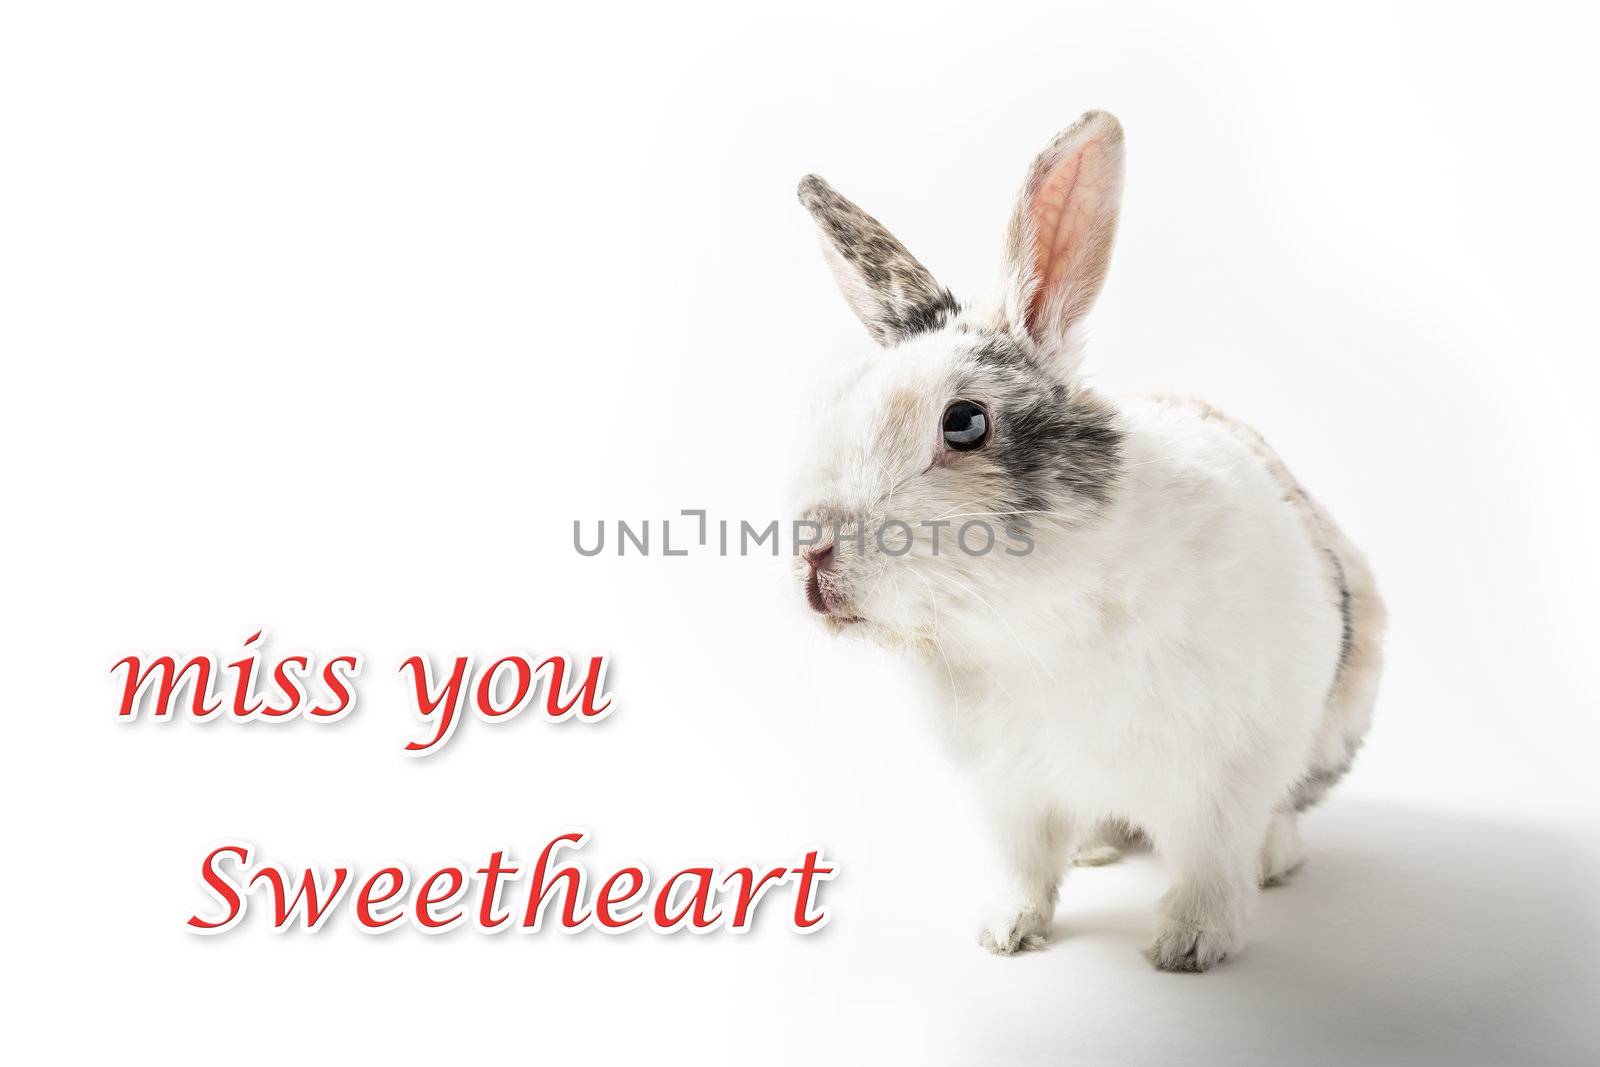 Sitting white and brown rabbit on white background with lettering "Miss you Sweetheart"